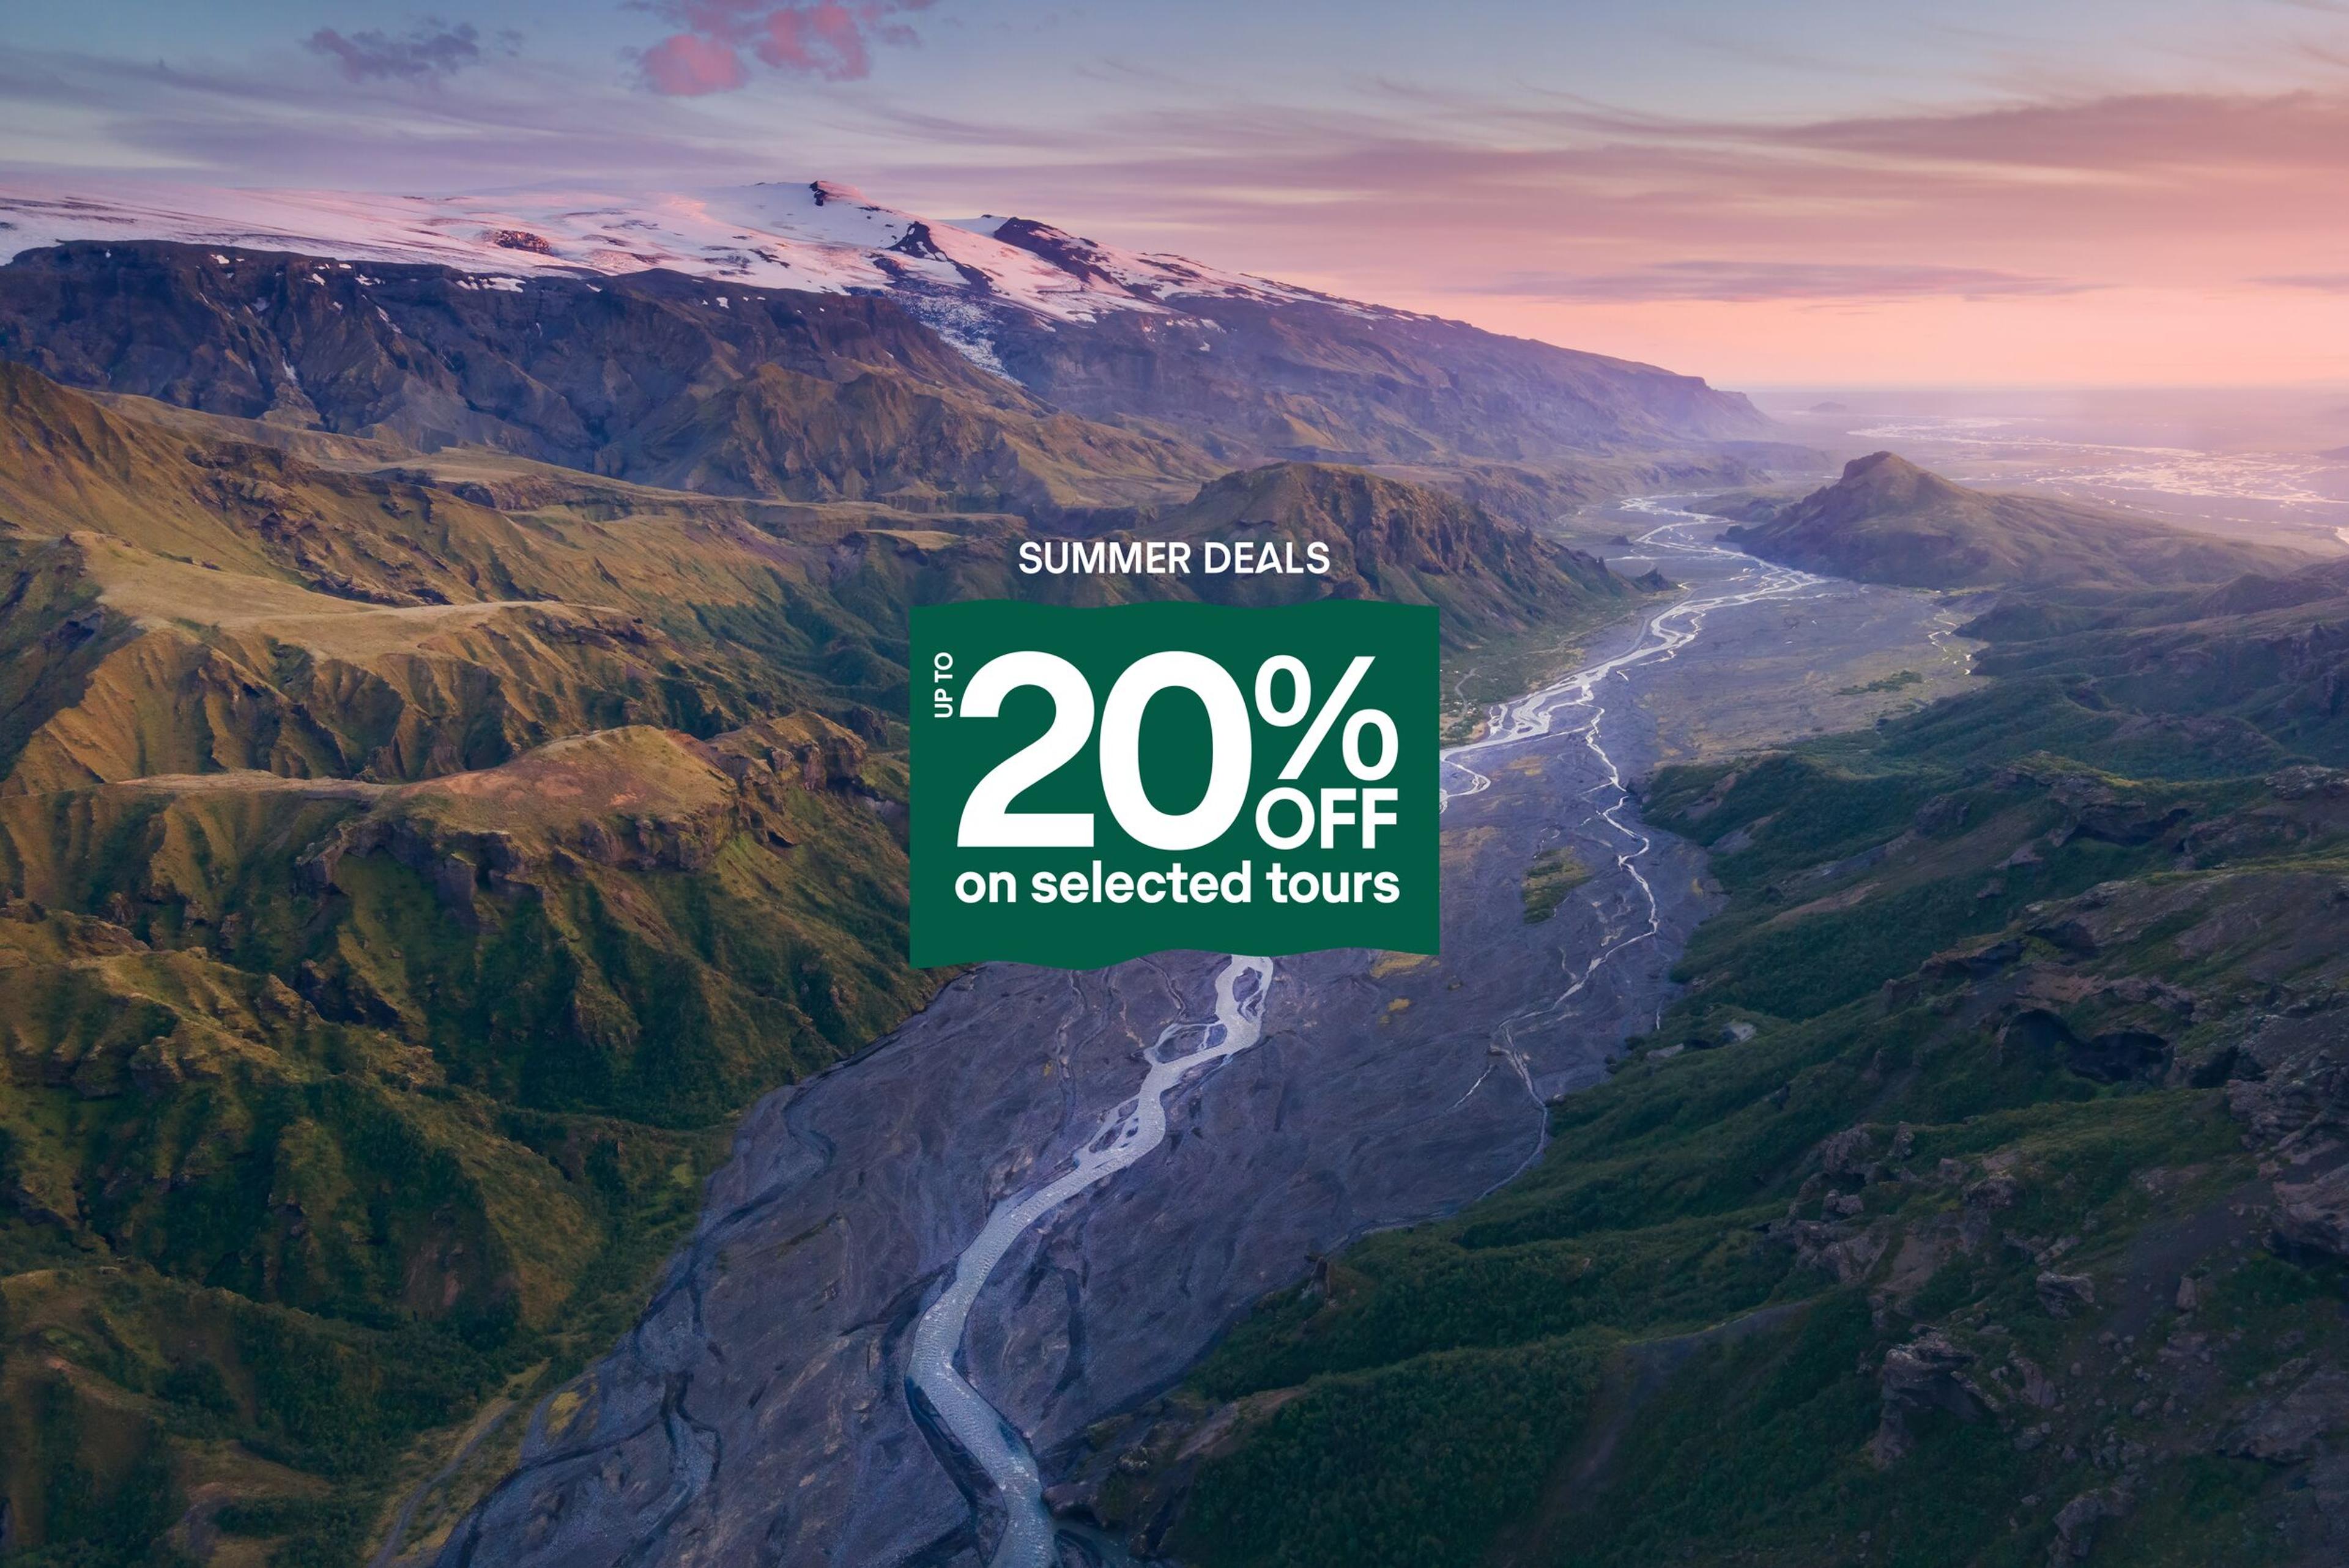 Scenic aerial view of Icelandic mountains with a river running through the valley, promoting summer deals with up to 20% off on selected tours.